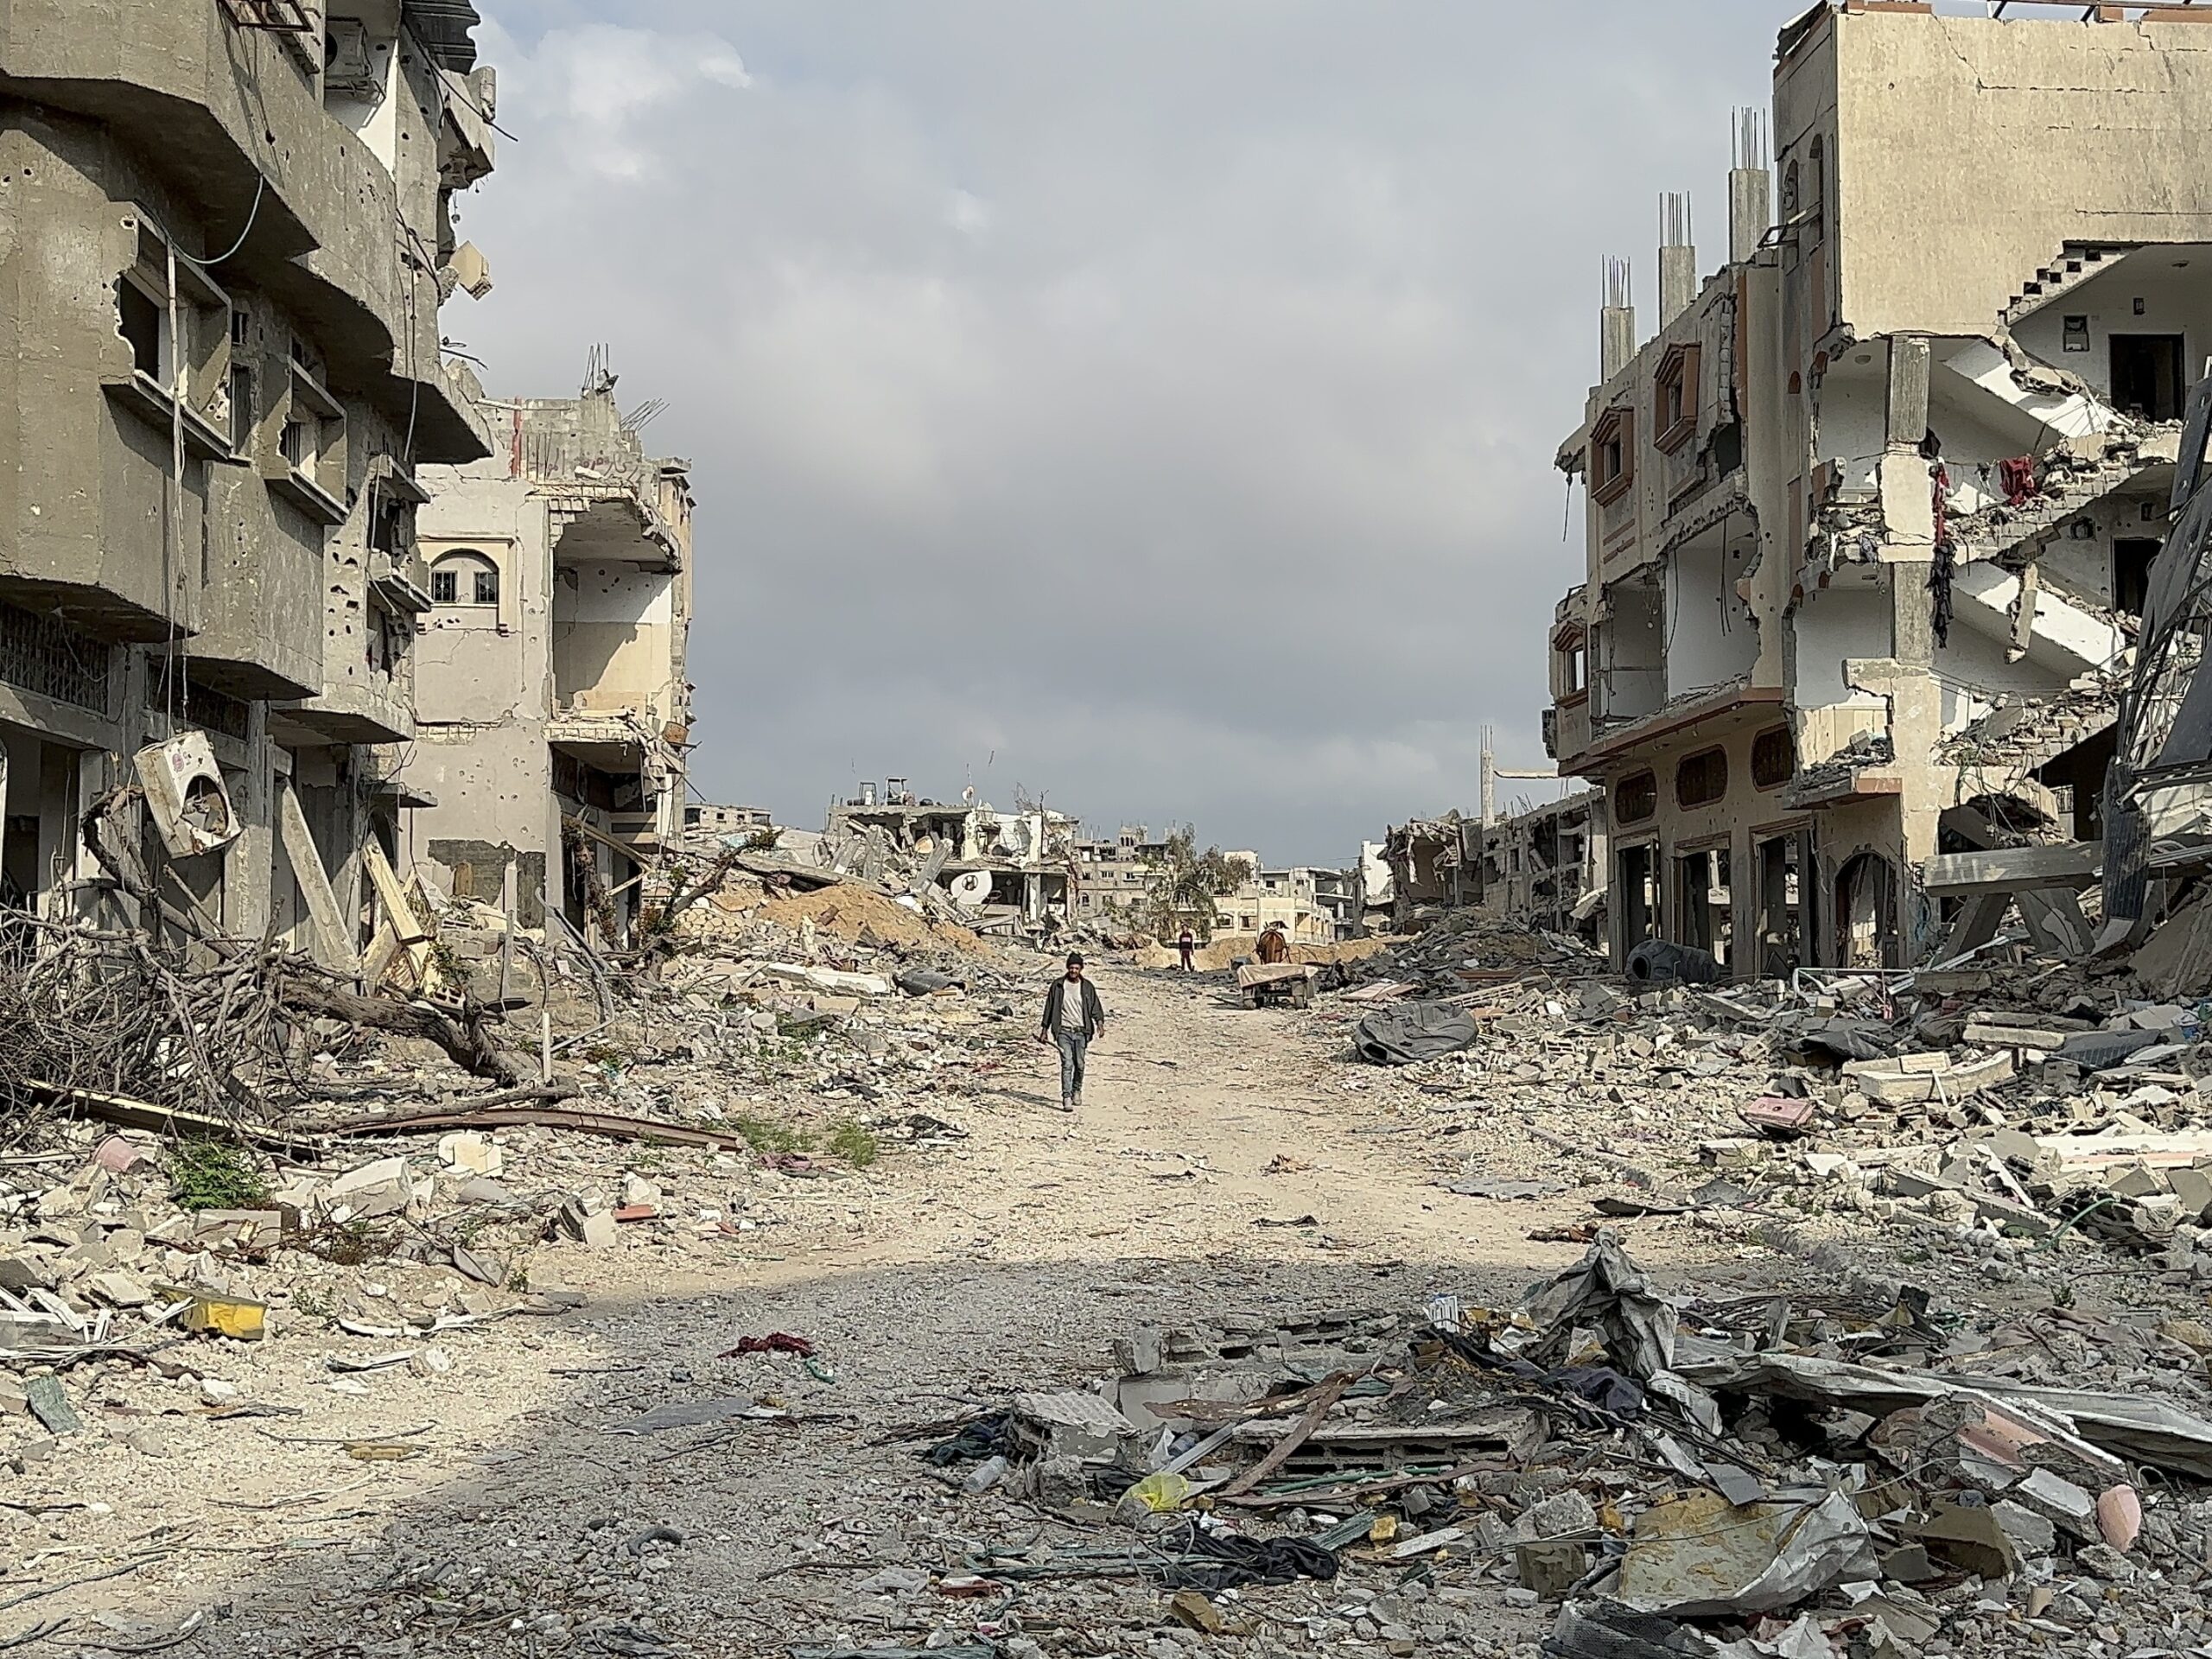 A first glimpse of Khan Younis, a Gaza city now lying in ruins